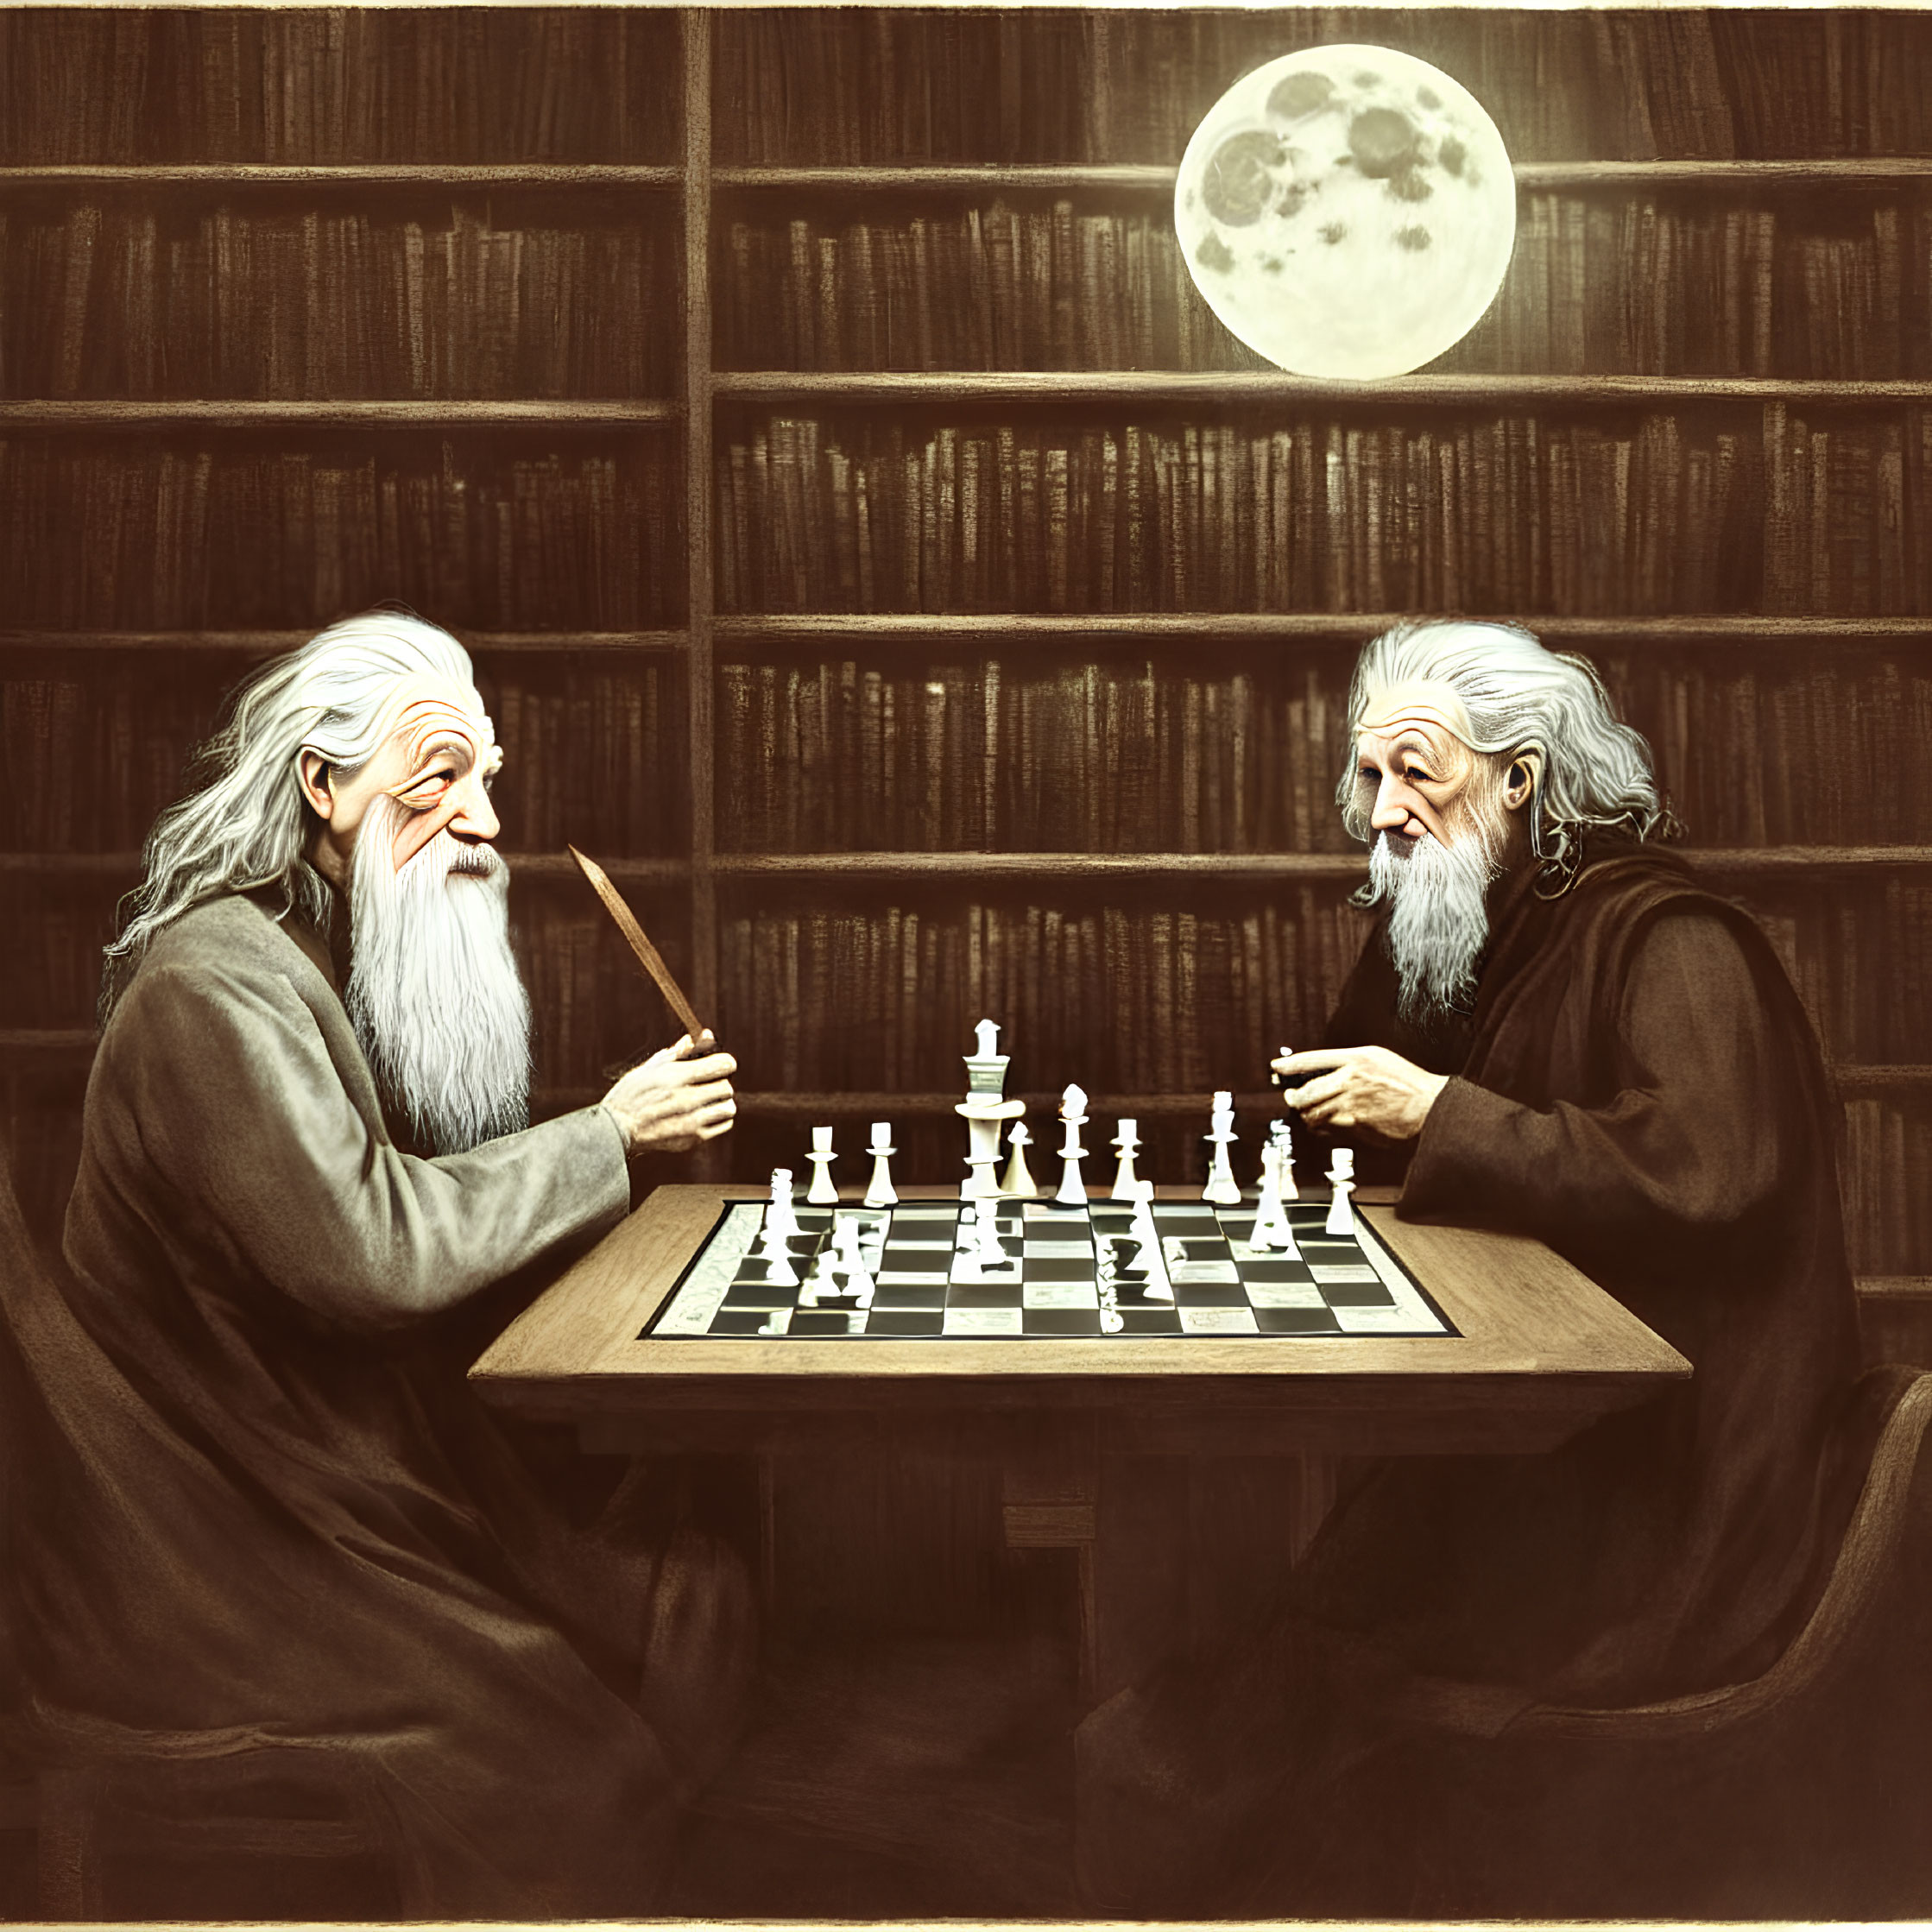 Elderly wizards playing chess in wood-paneled library under full moon